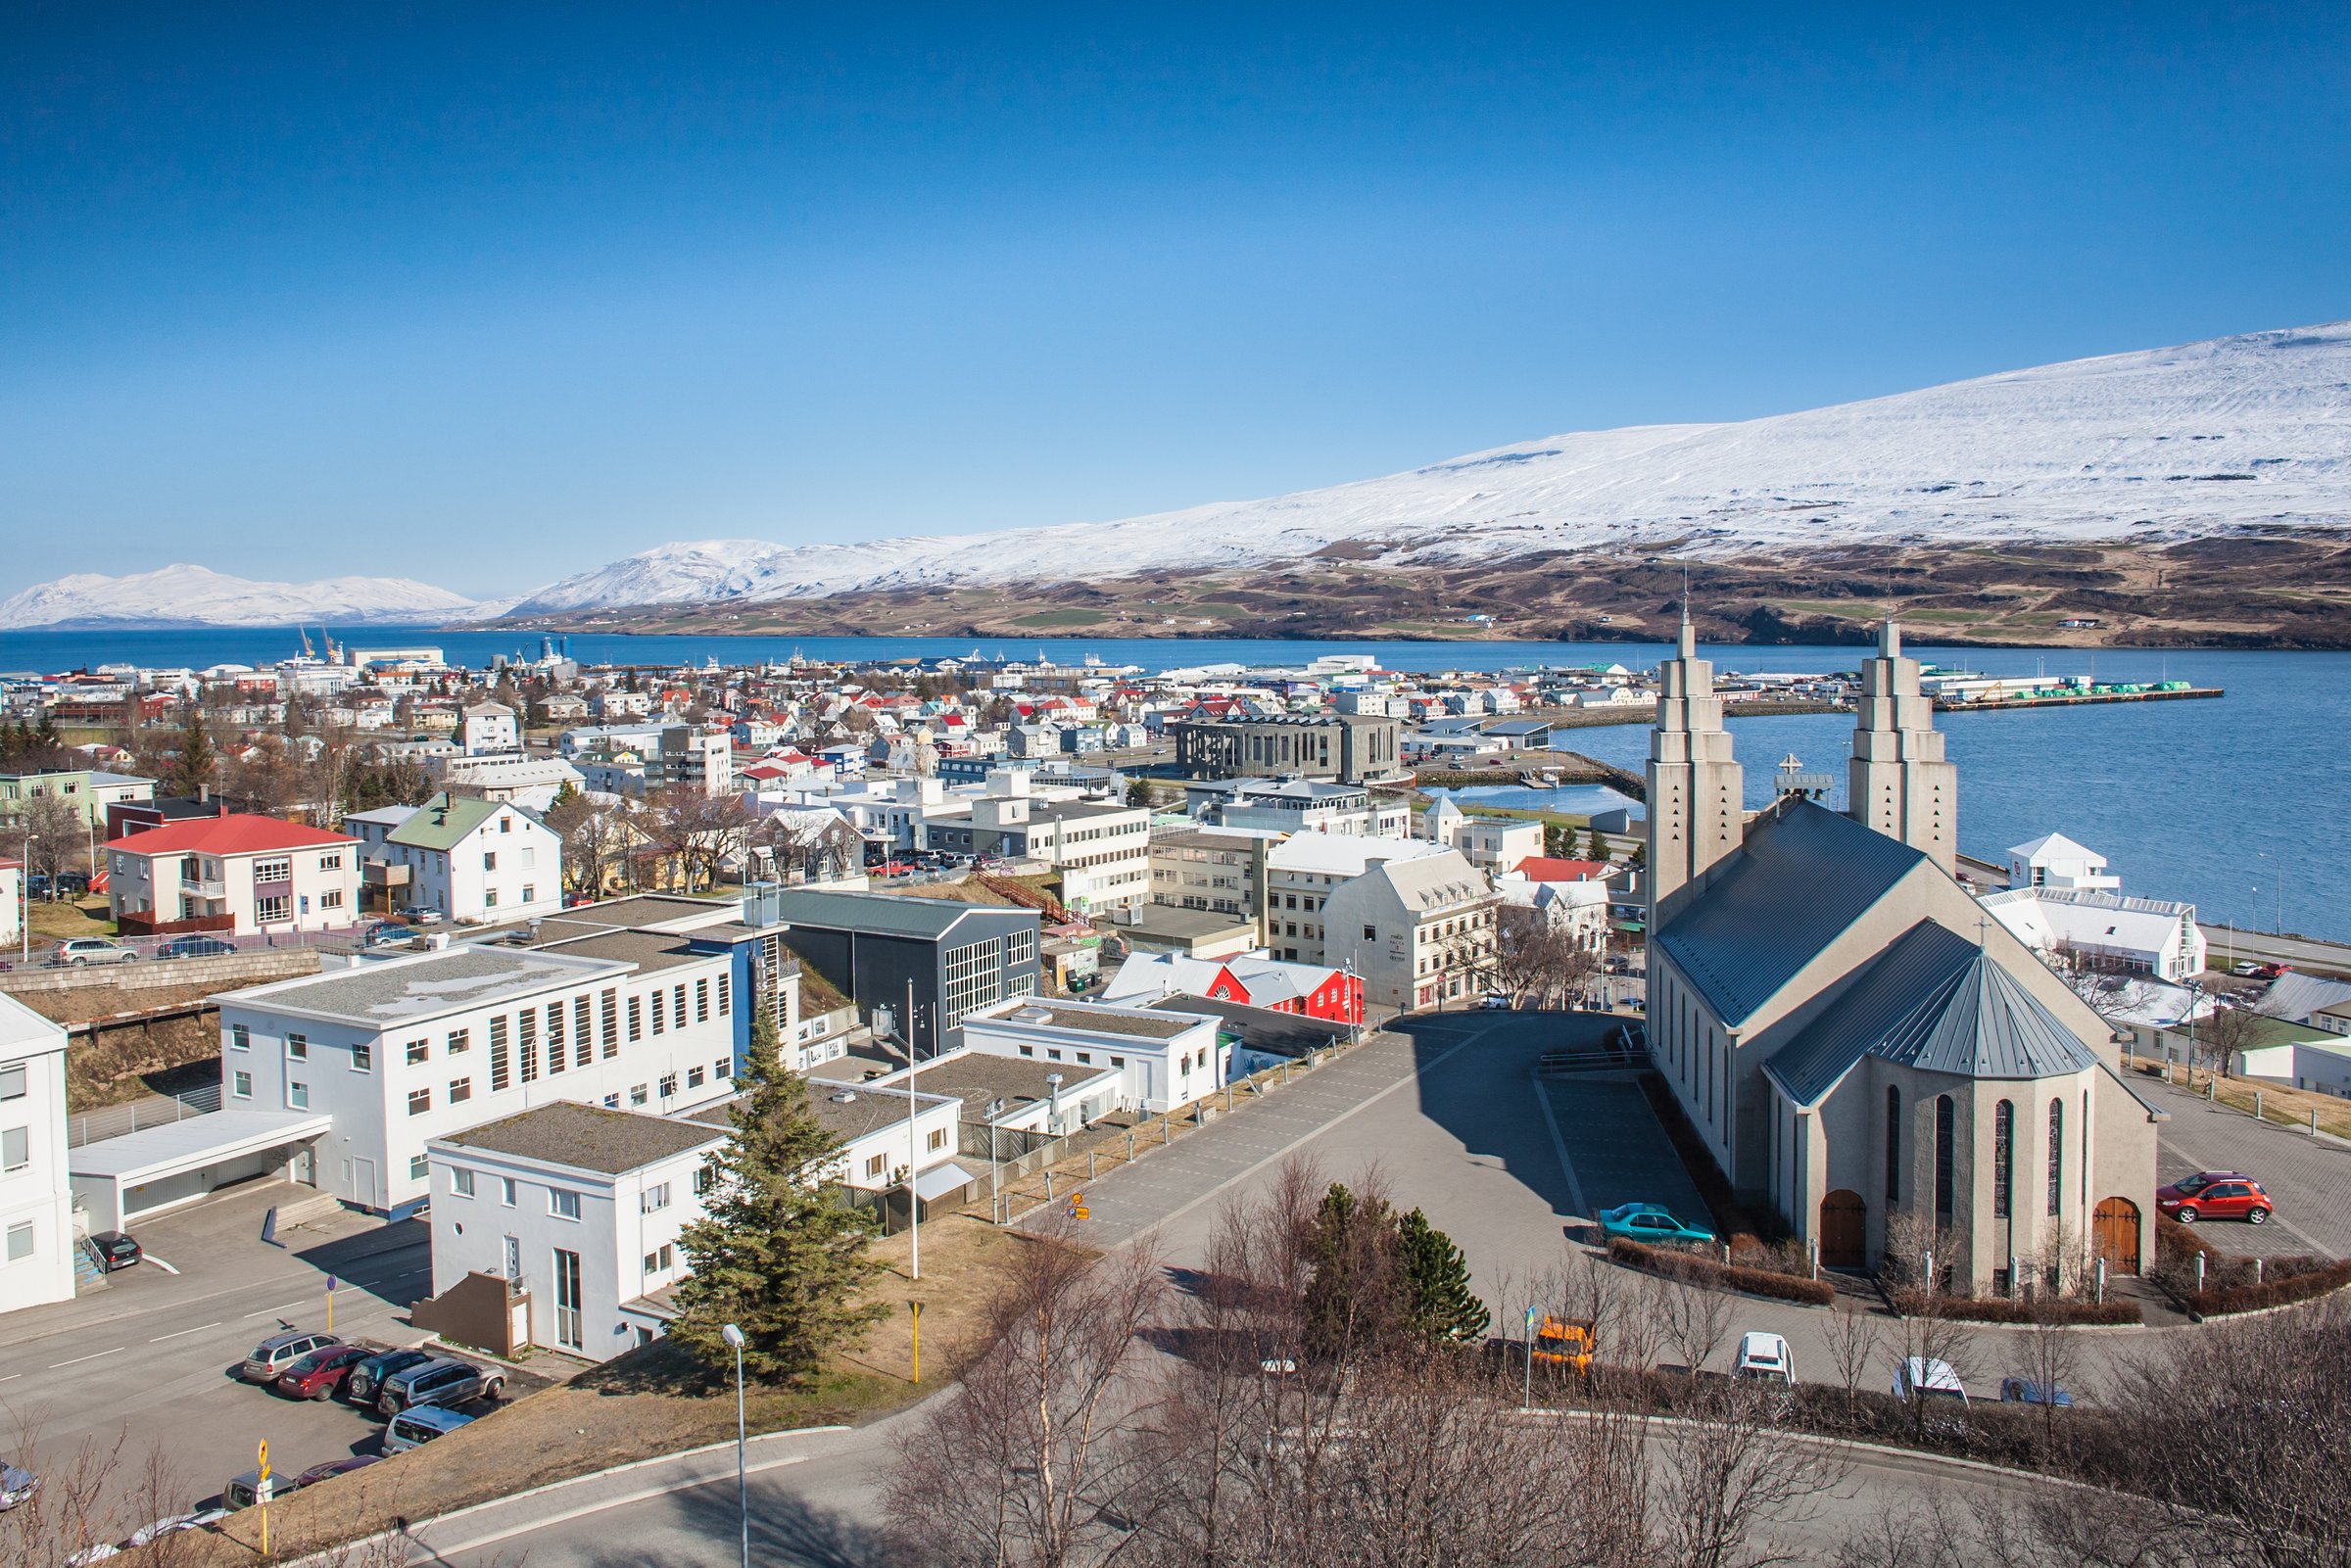 An aerial view of downtown Akureyri with the fjord in the background and the distinctive town church in the foreground